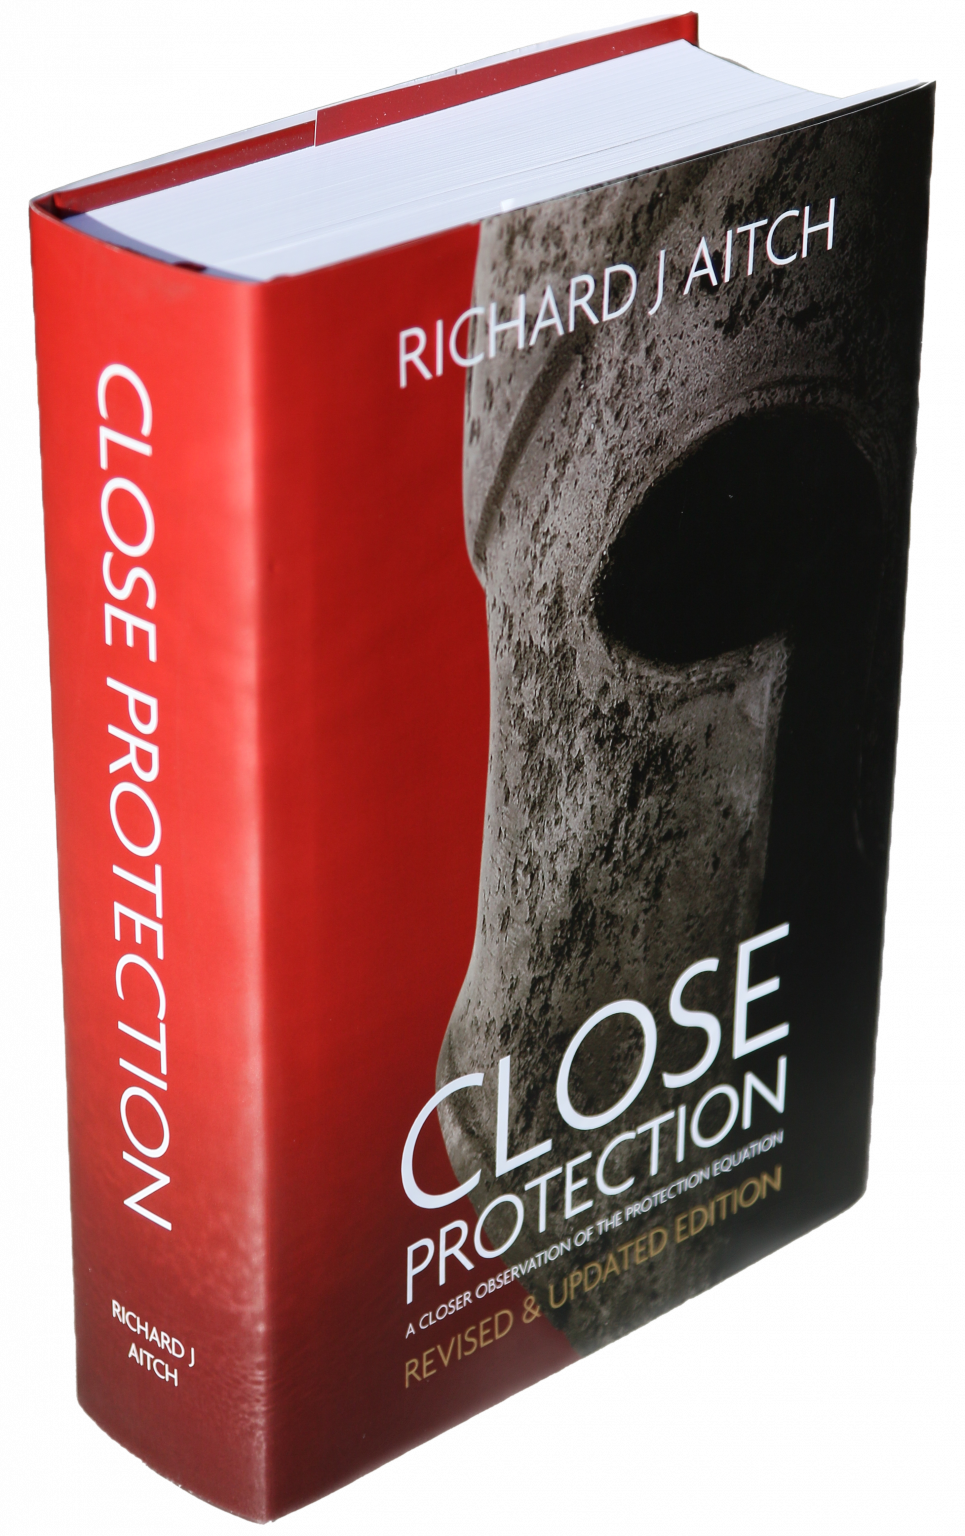 The Close Protection Book by Richard J Aitch Order Here!